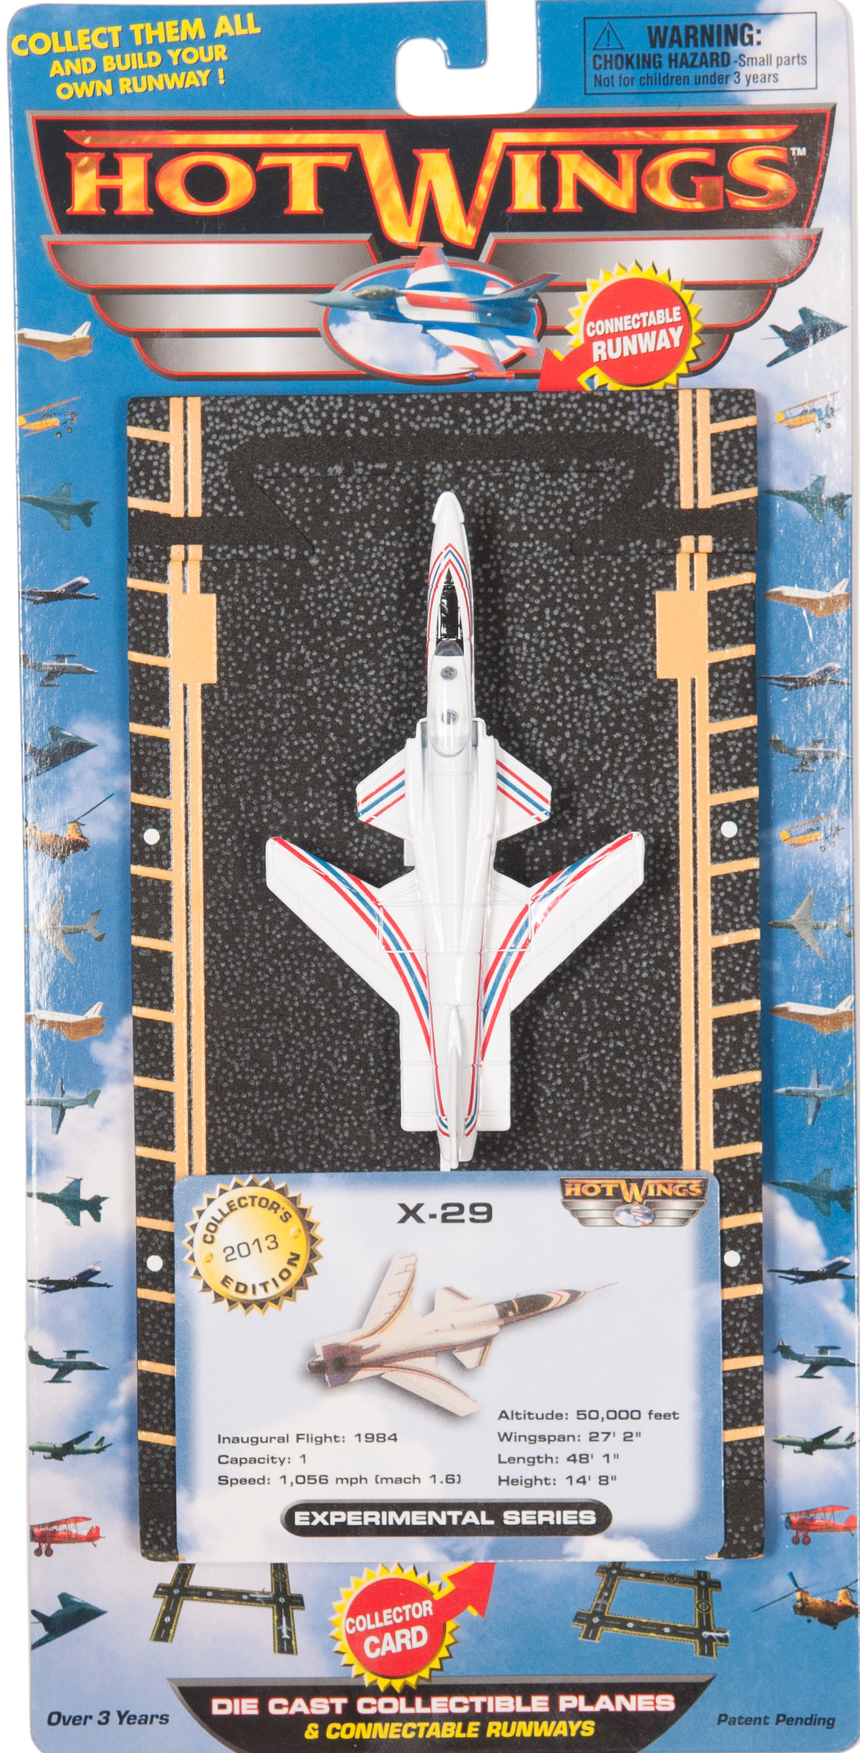 X-29 (with red & blue stripes)